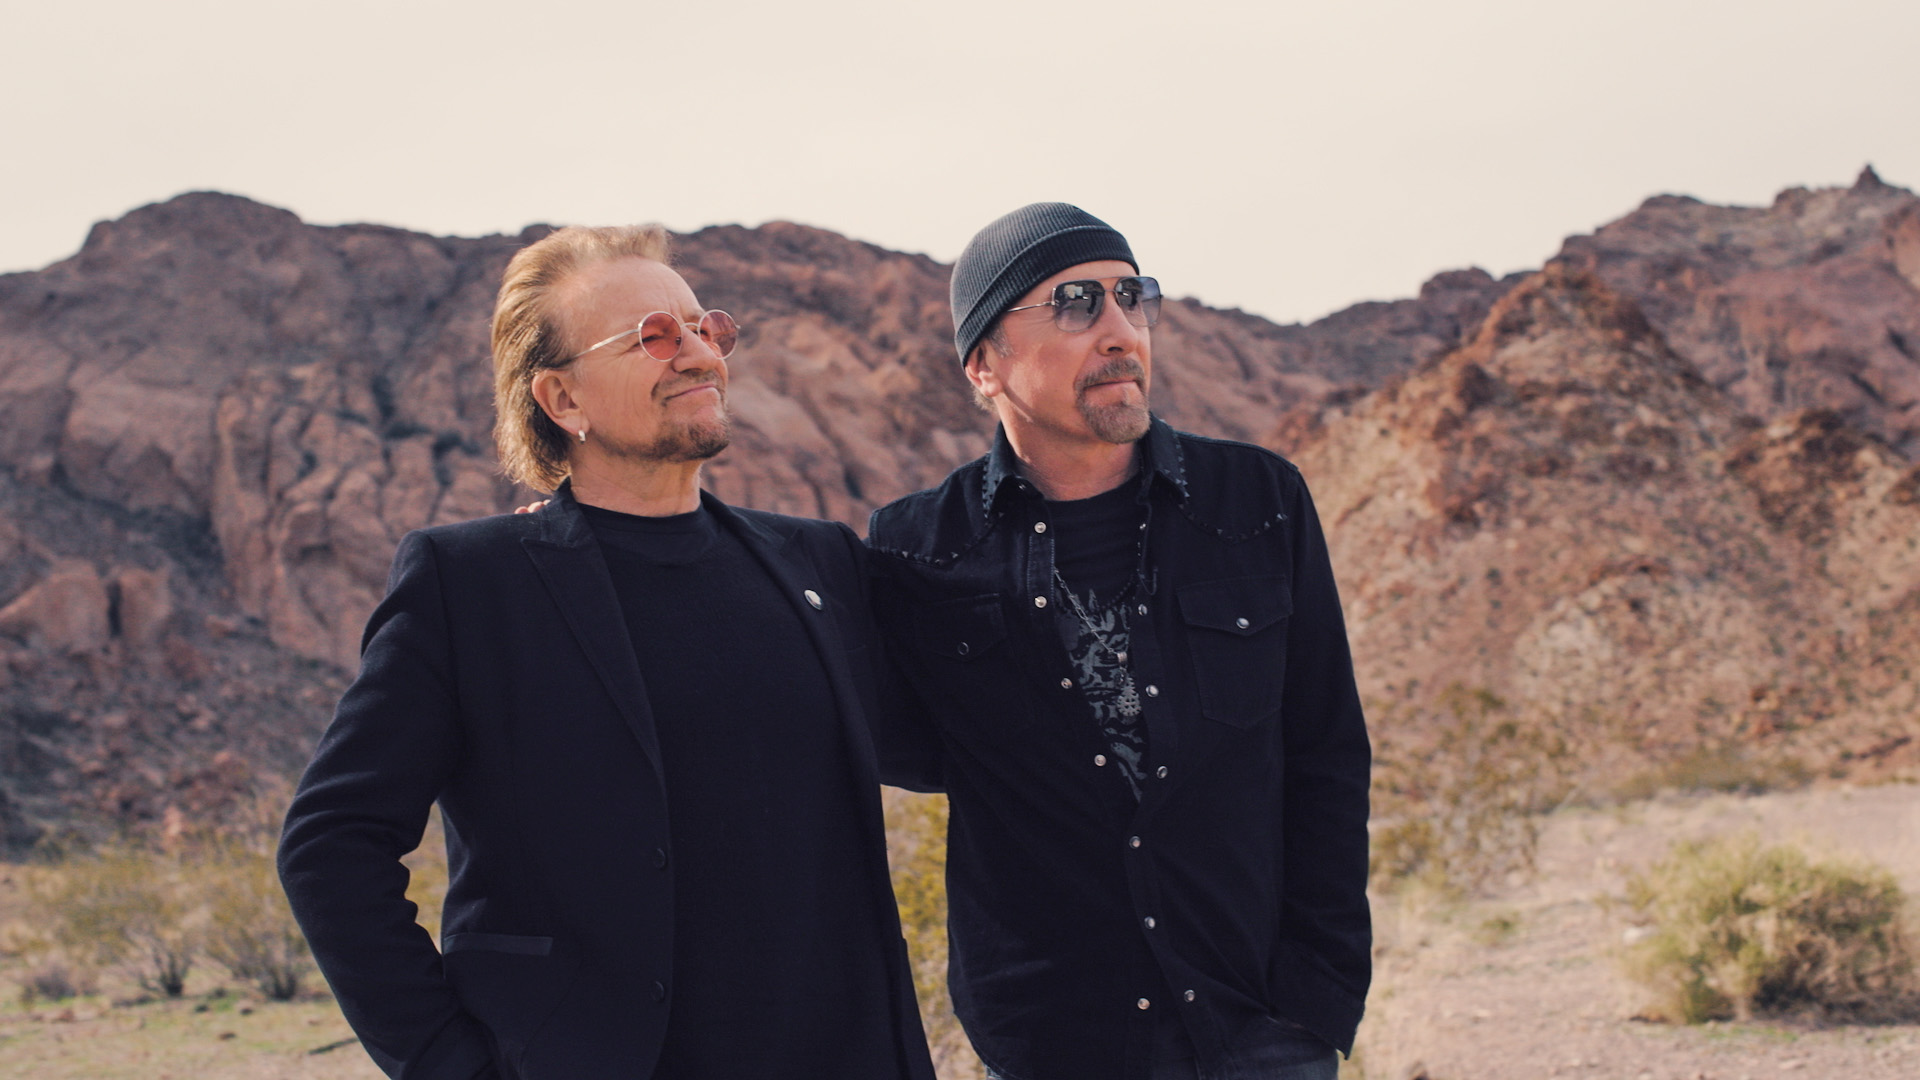 Bono and The Edge of U2 Take Apple Music Behind The Scenes of the New Sphere Venue in Las Vegas